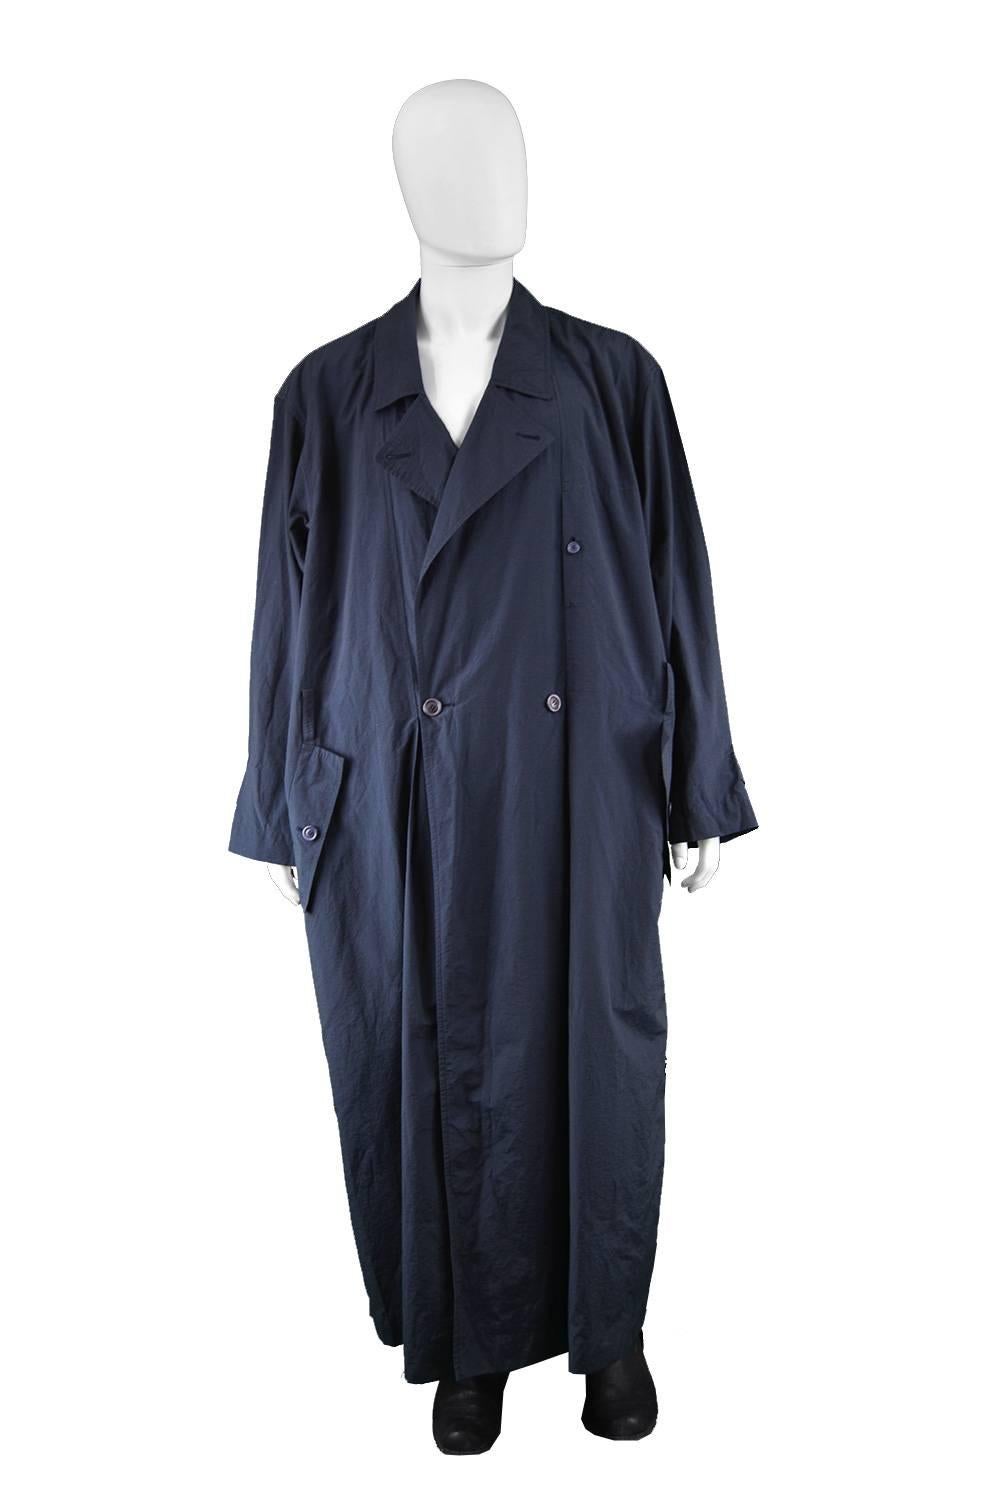 Issey Miyake Men Vintage 1980s Dark Navy Blue Maxi Trench Windcoat 

Size:  Marked M but fits most sizes due to oversized cut. Would suit a tall man or woman due to long maxi length. Please check measurements.
Chest - Free up to 56